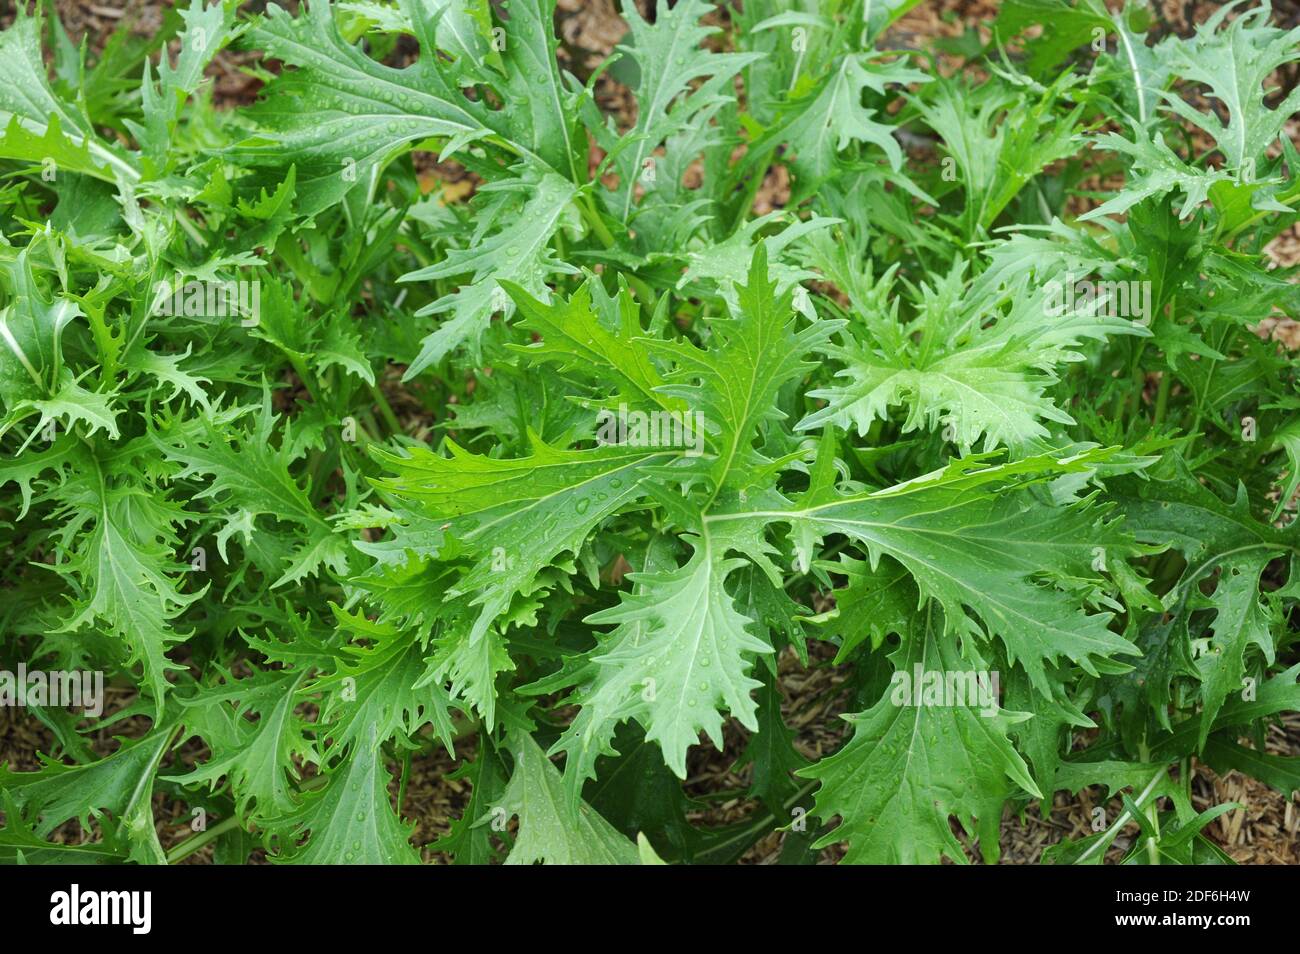 Mizuna or Japanese mustard (Brassica rapa nipposinica) is an edible plant cultivated for its leaves. Stock Photo